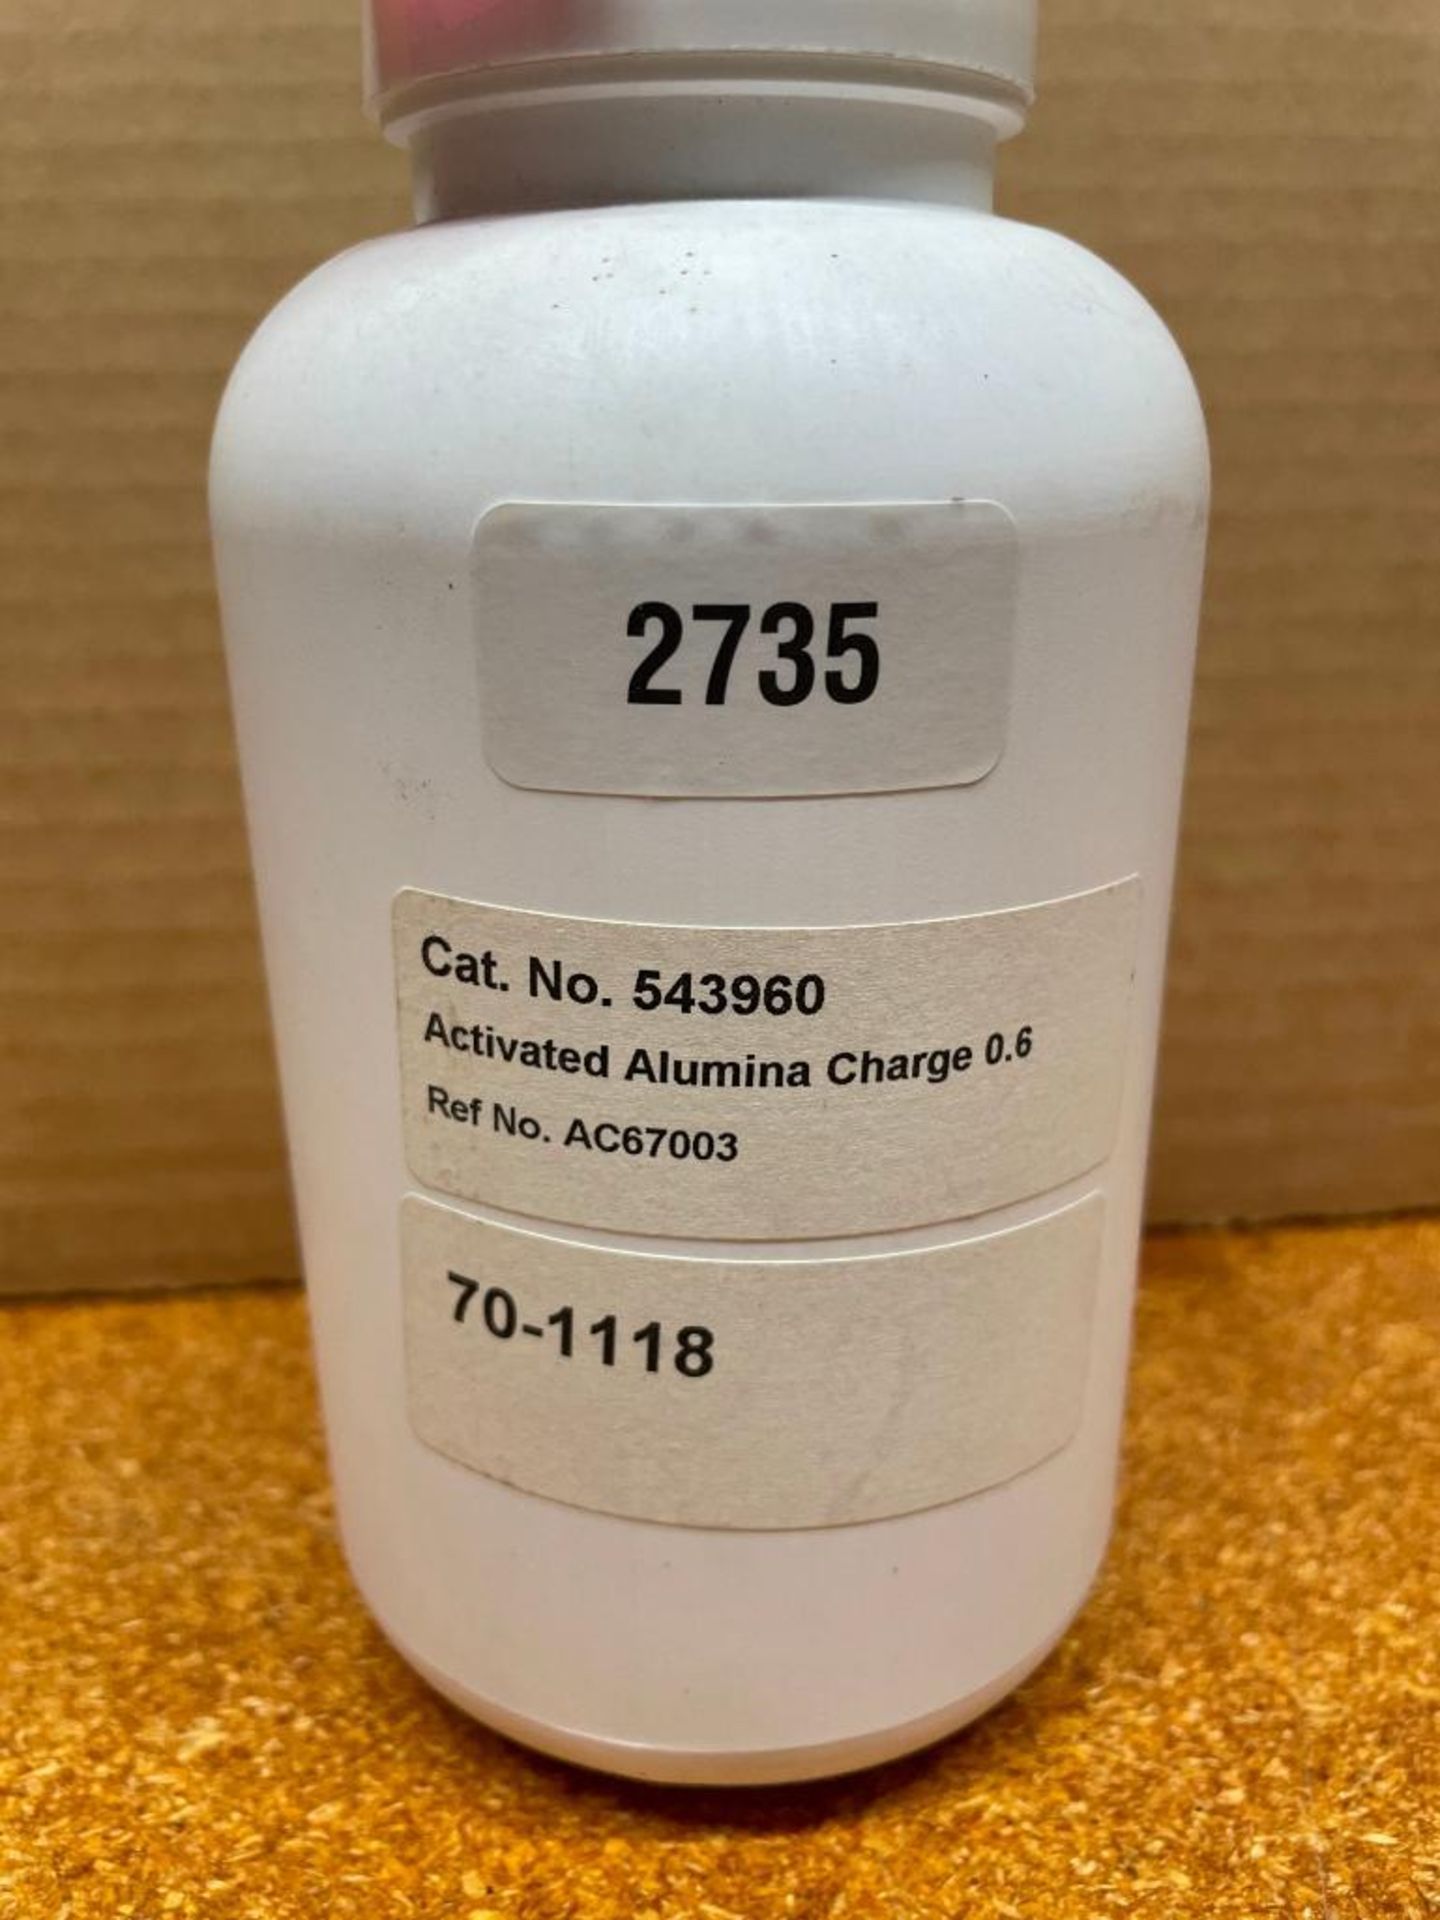 JAR OF ACTIVATED ALUMINA CHARGE BRAND/MODEL: 70-1118 INFORMATION: 0.6 QTY: 1 - Image 3 of 3